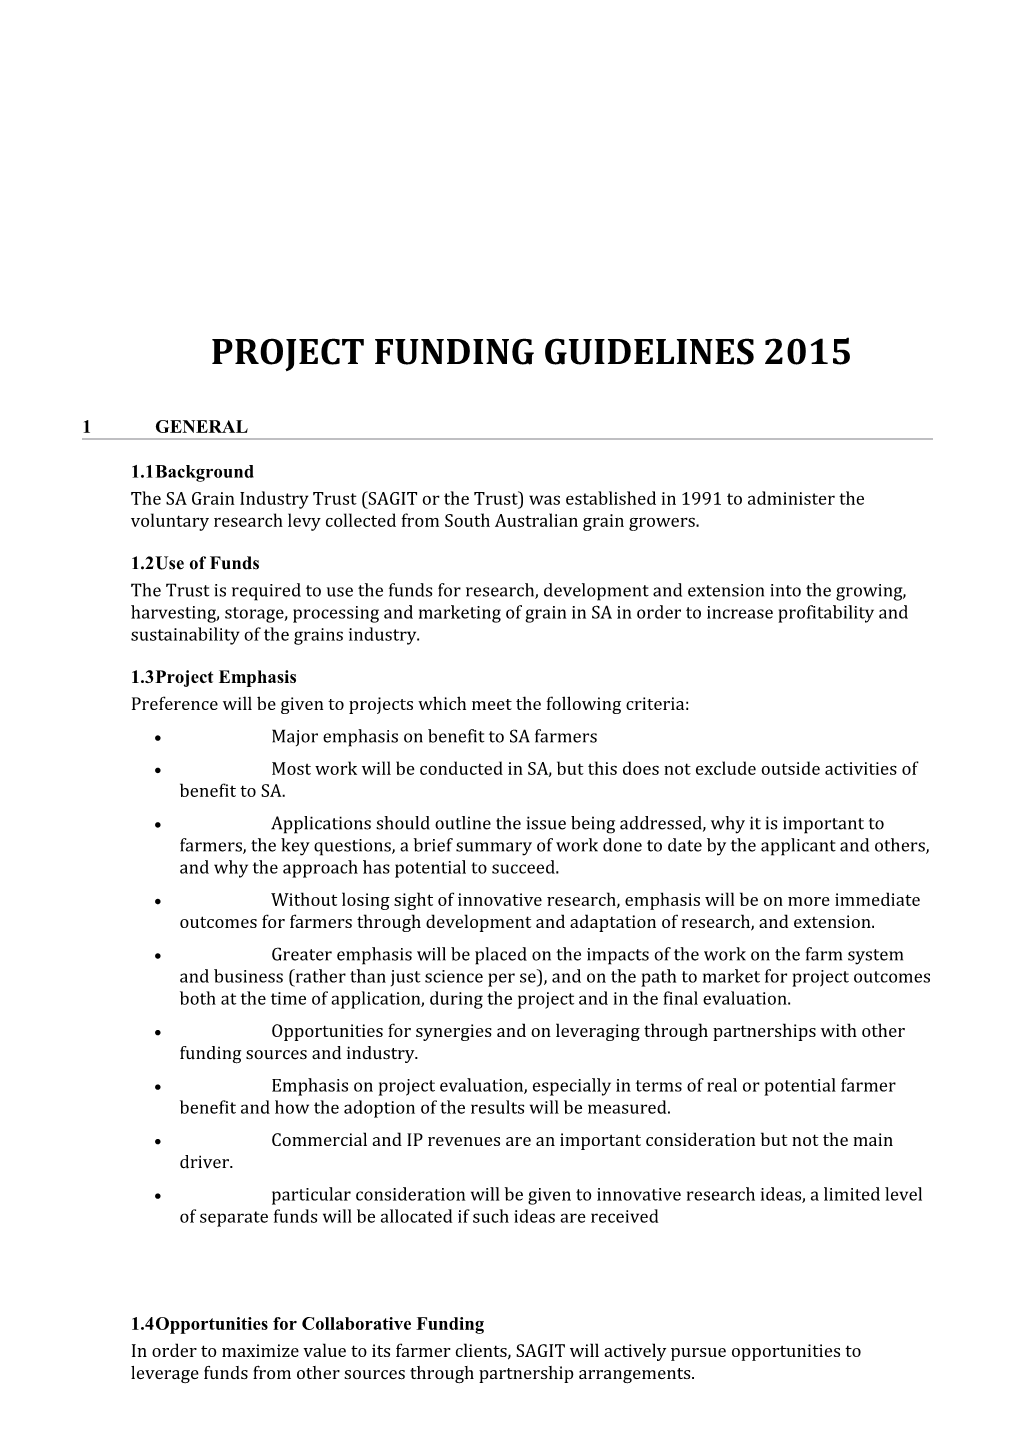 Project Funding Guidelines 2015